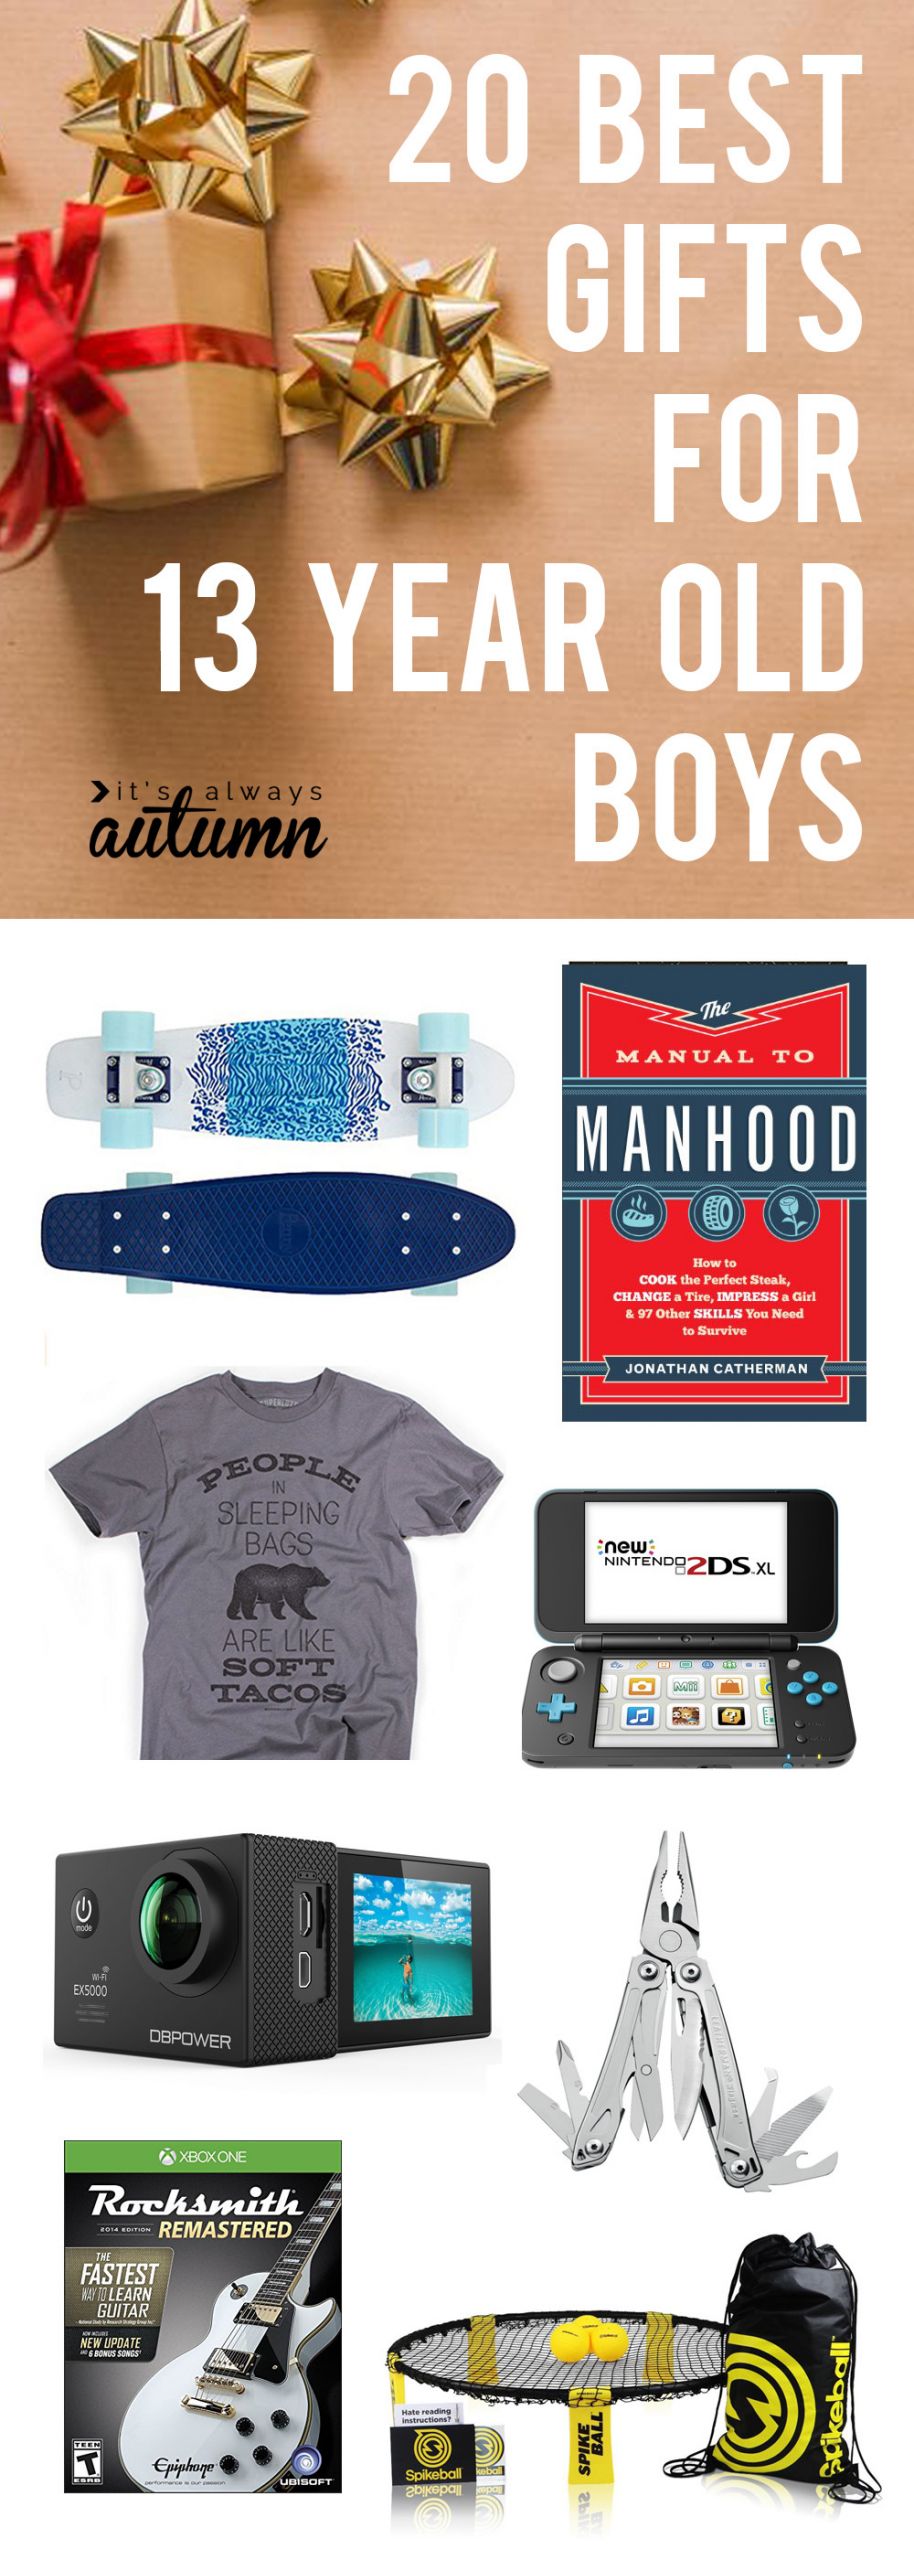 13 Year Old Boy Birthday Gift Ideas
 best Christmas ts for 13 year old boys It s Always Autumn